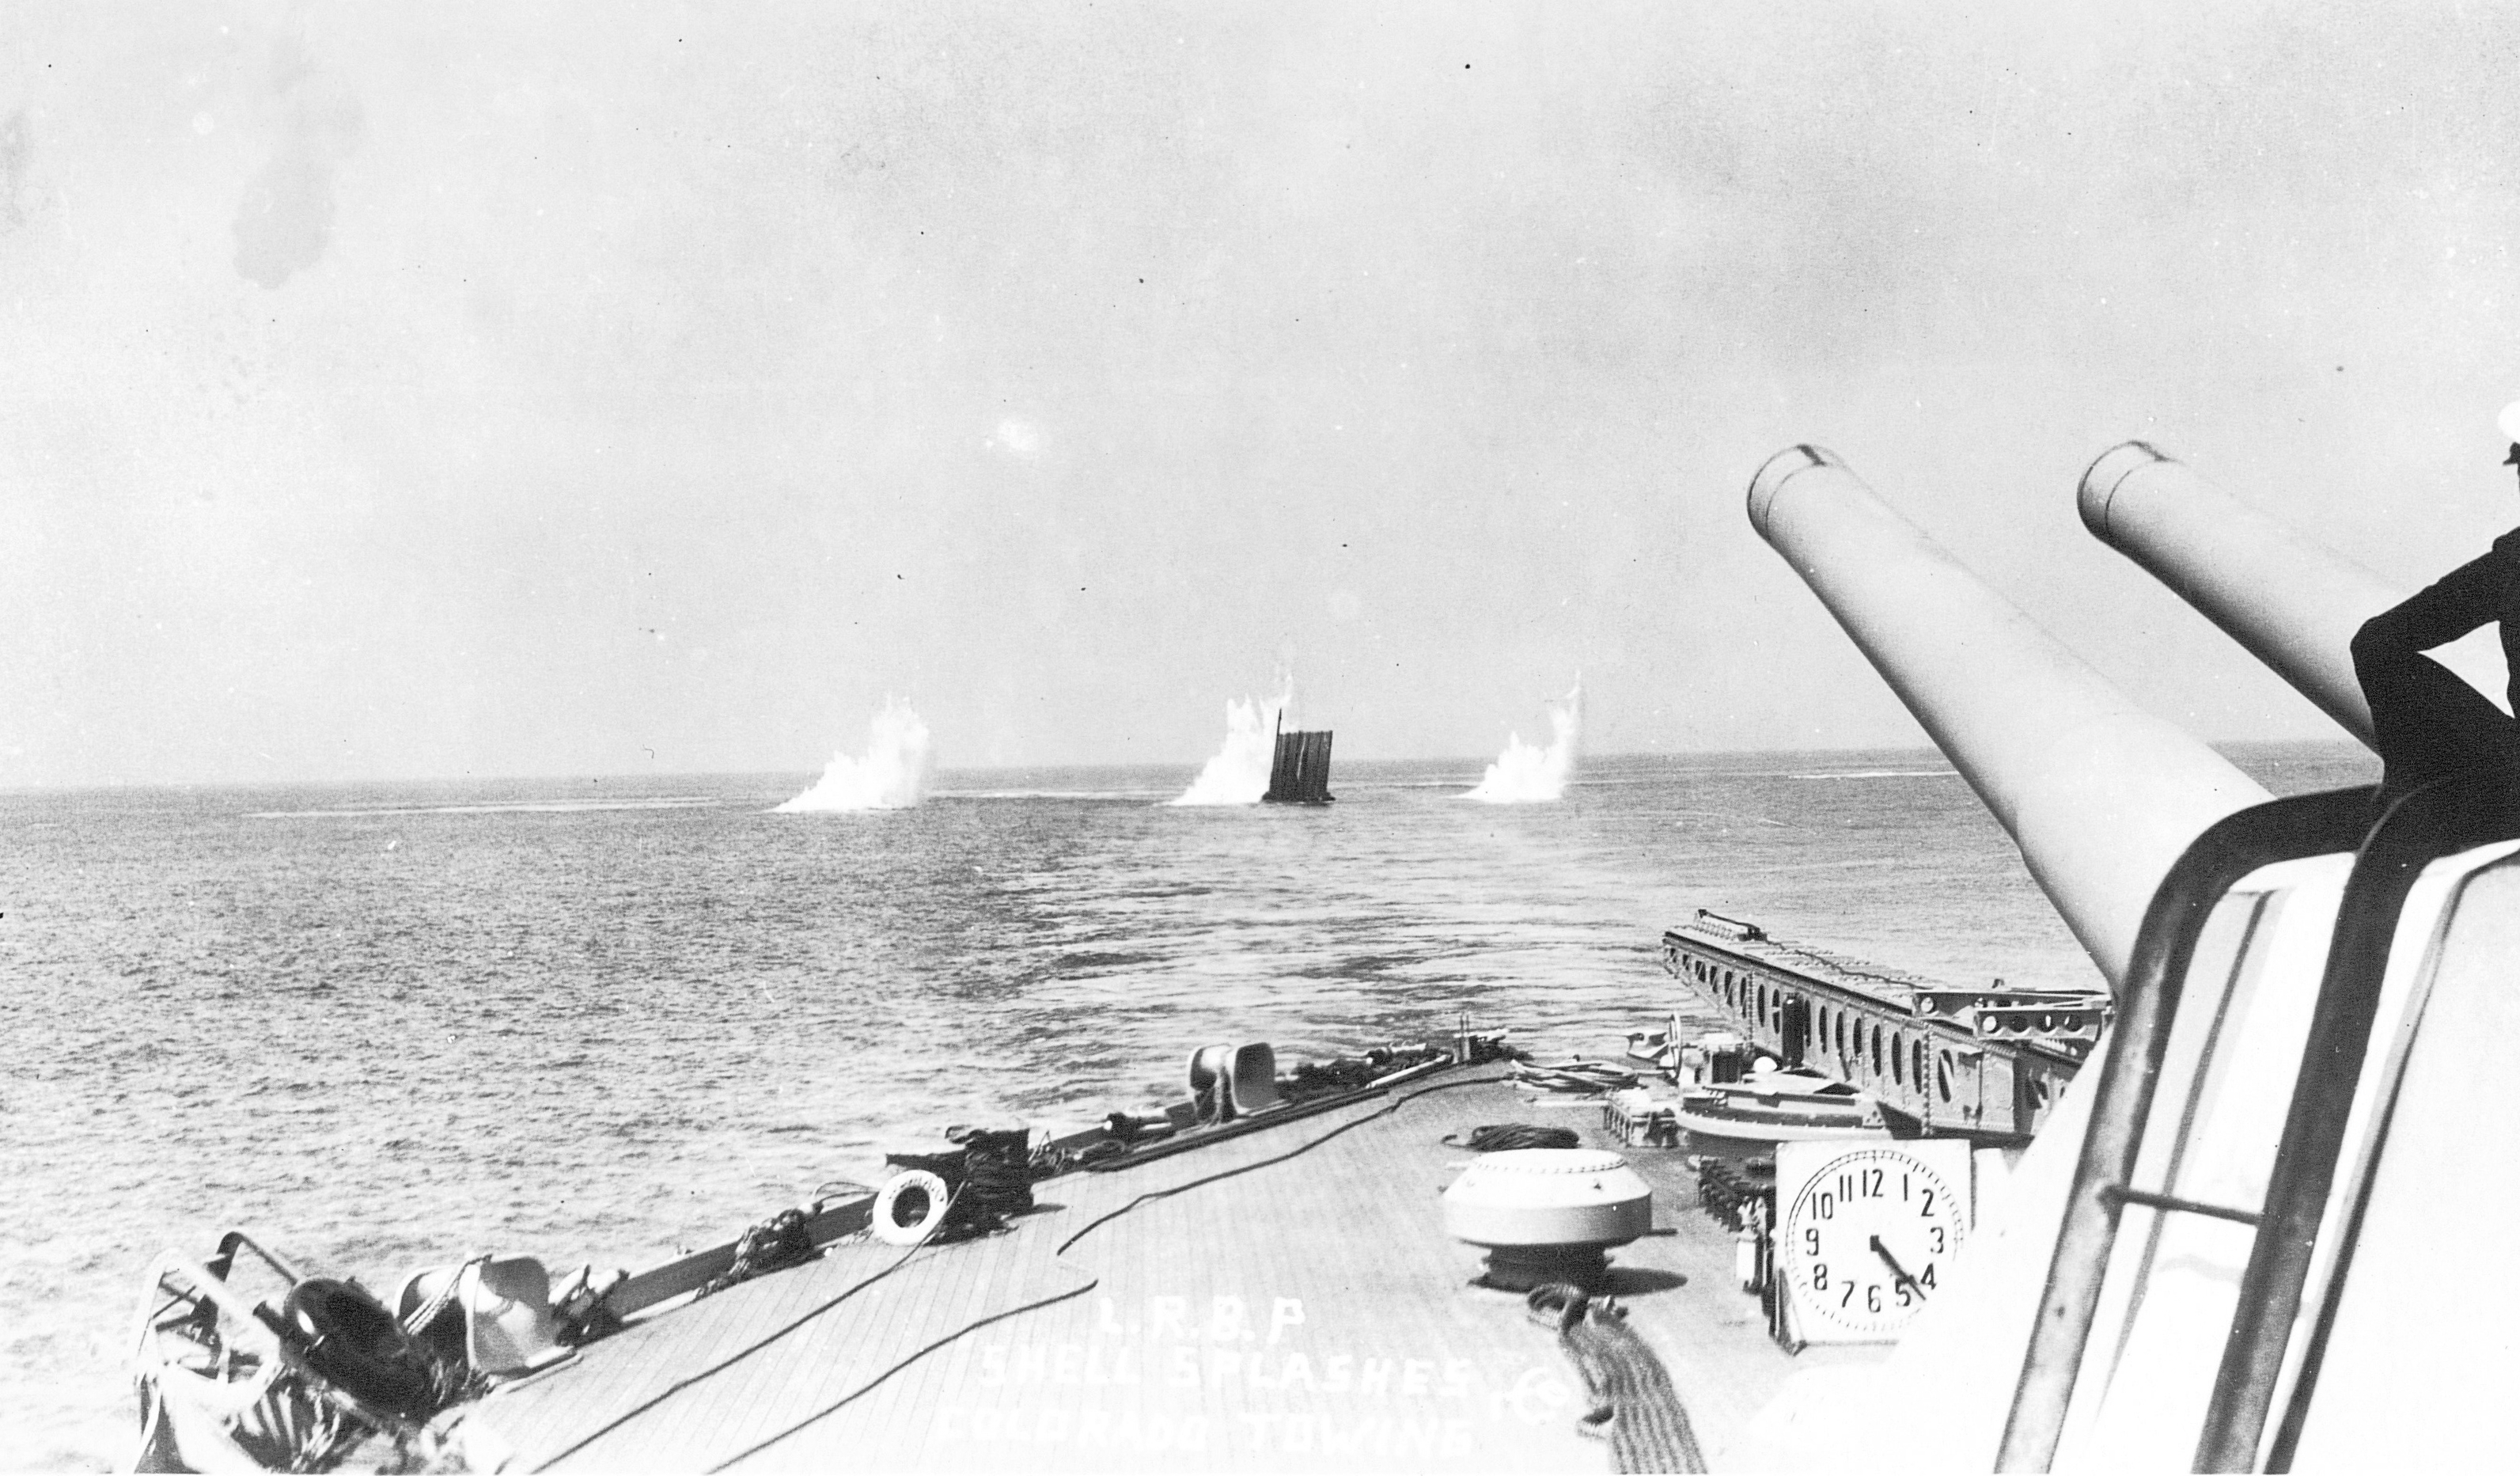 USS Colorado towing targets for long range battle practice, mid-1920s